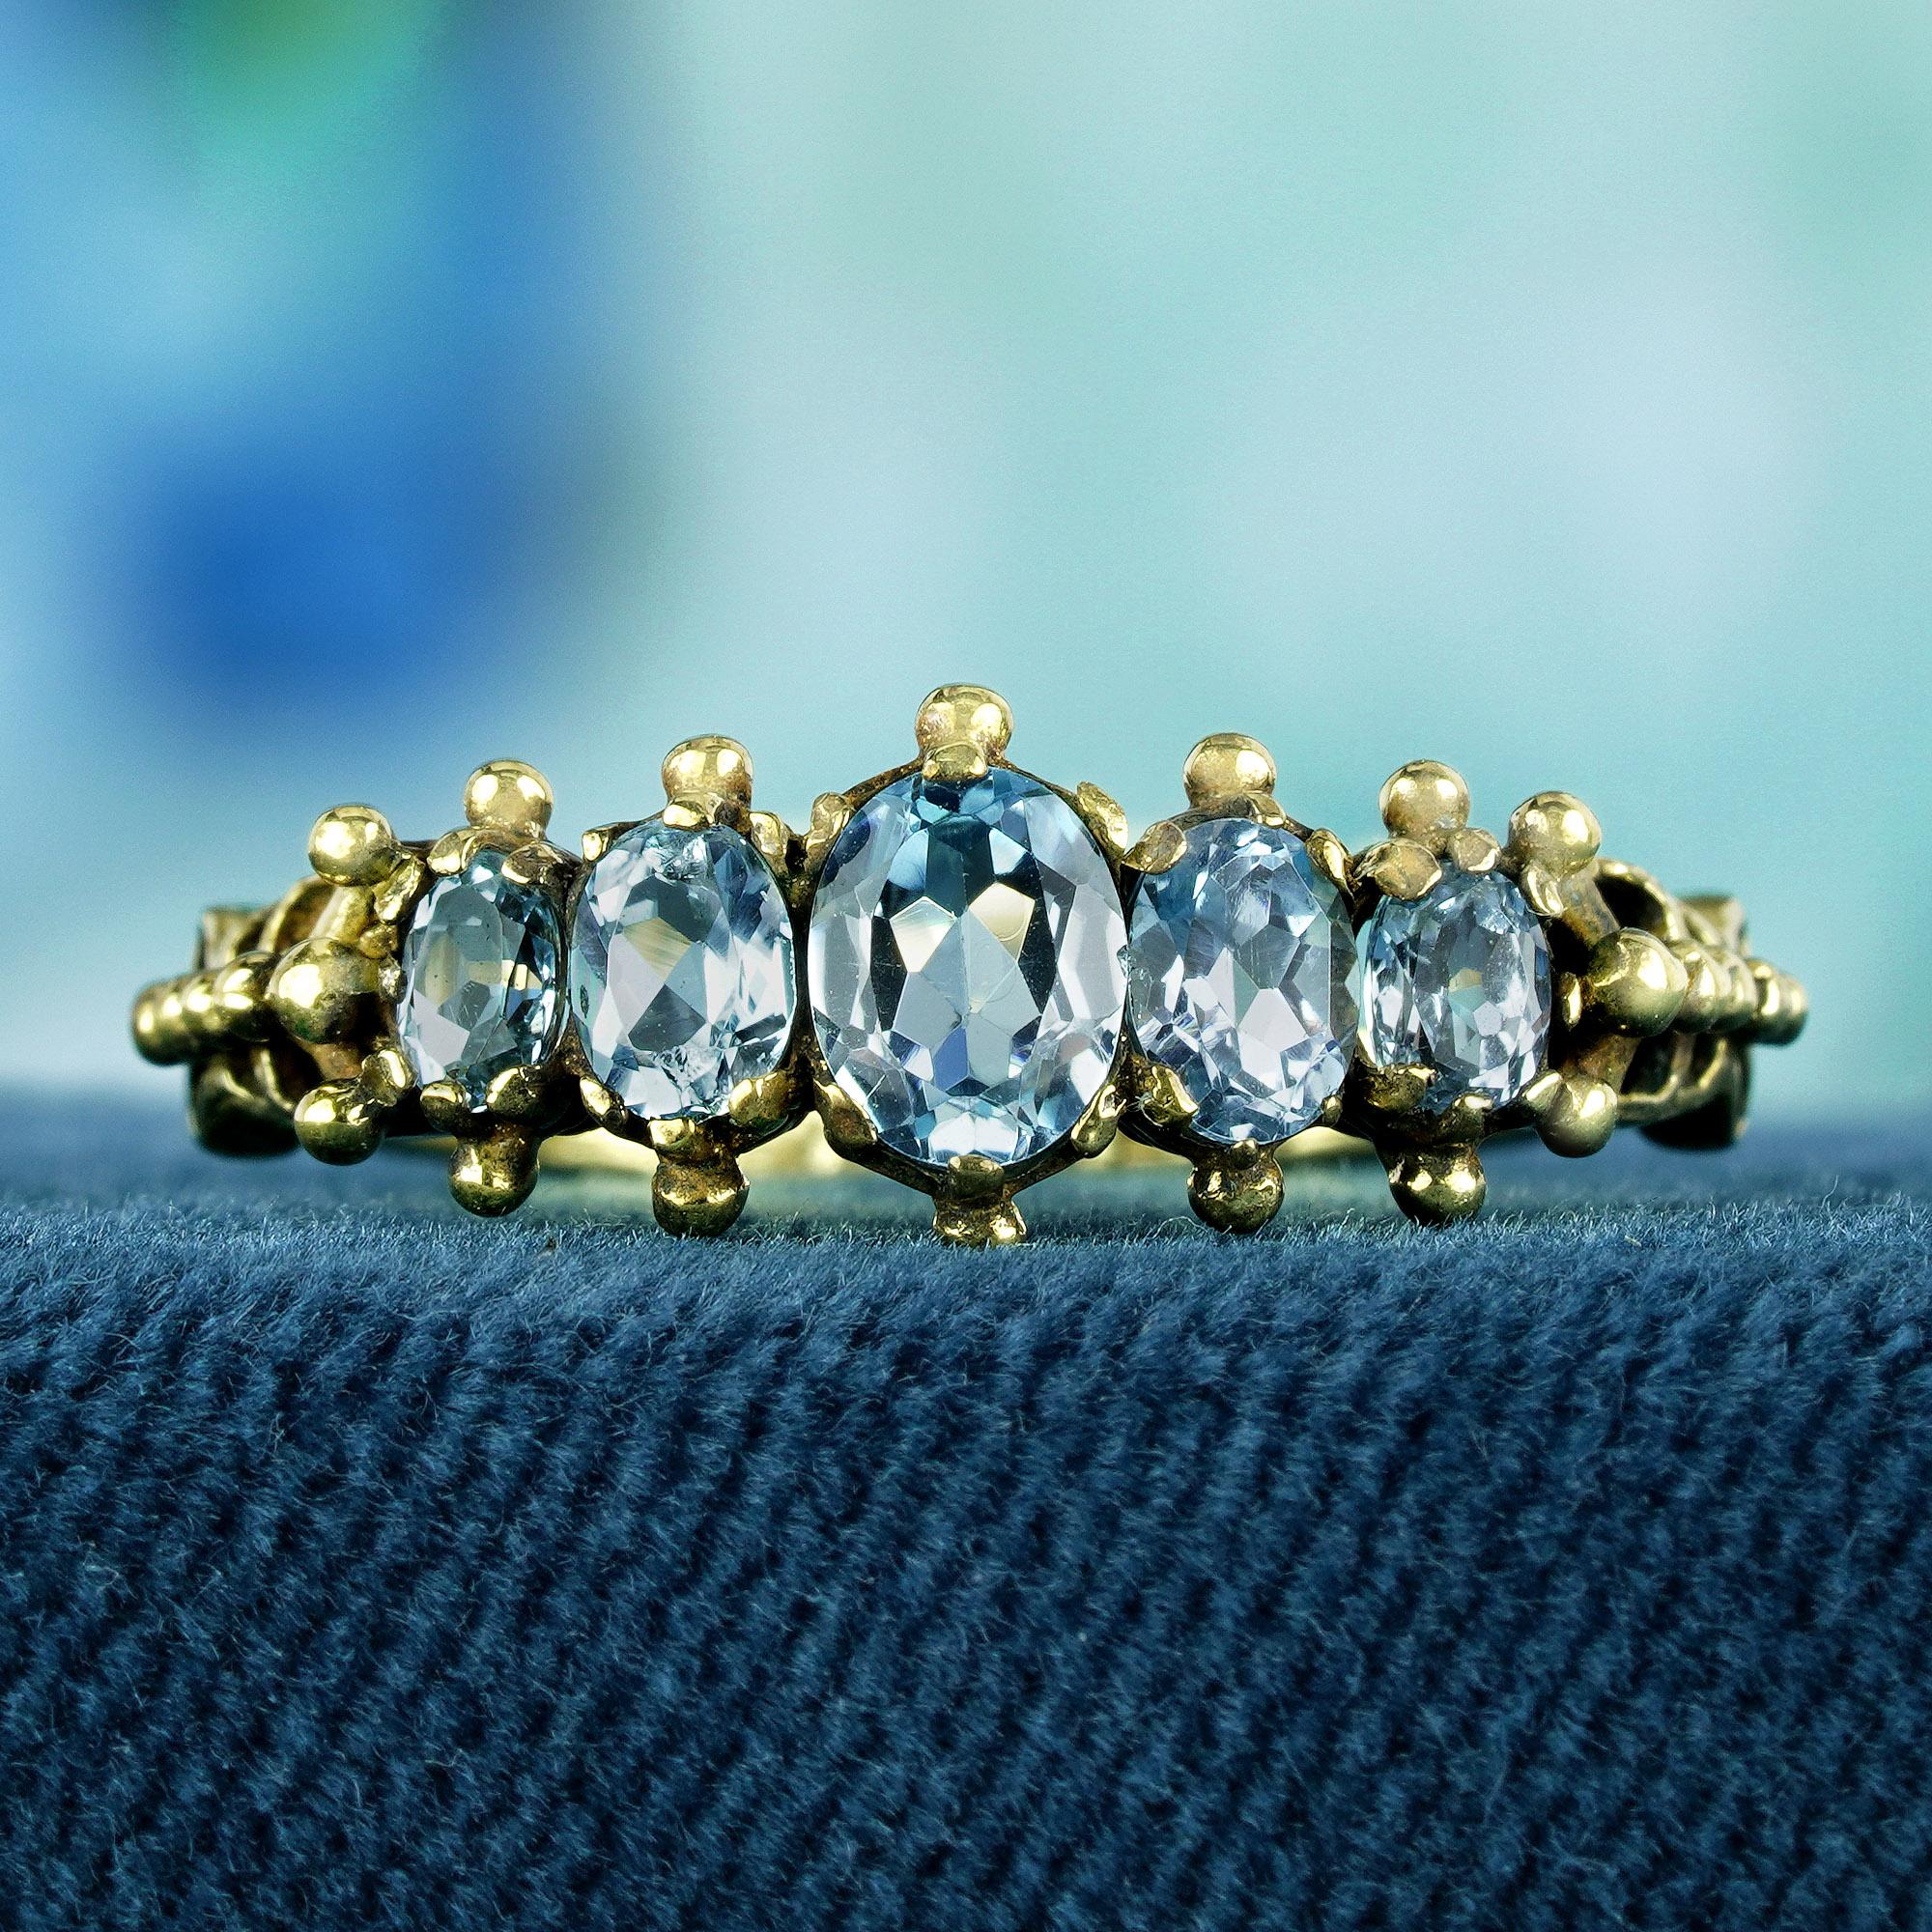 Discover timeless elegance with our blue topaz vintage style five stone ring in yellow gold. delicately cradled in a prong setting band. Each sky blue oval topaz stone is meticulously arranged to capture the essence of sophistication and grace.